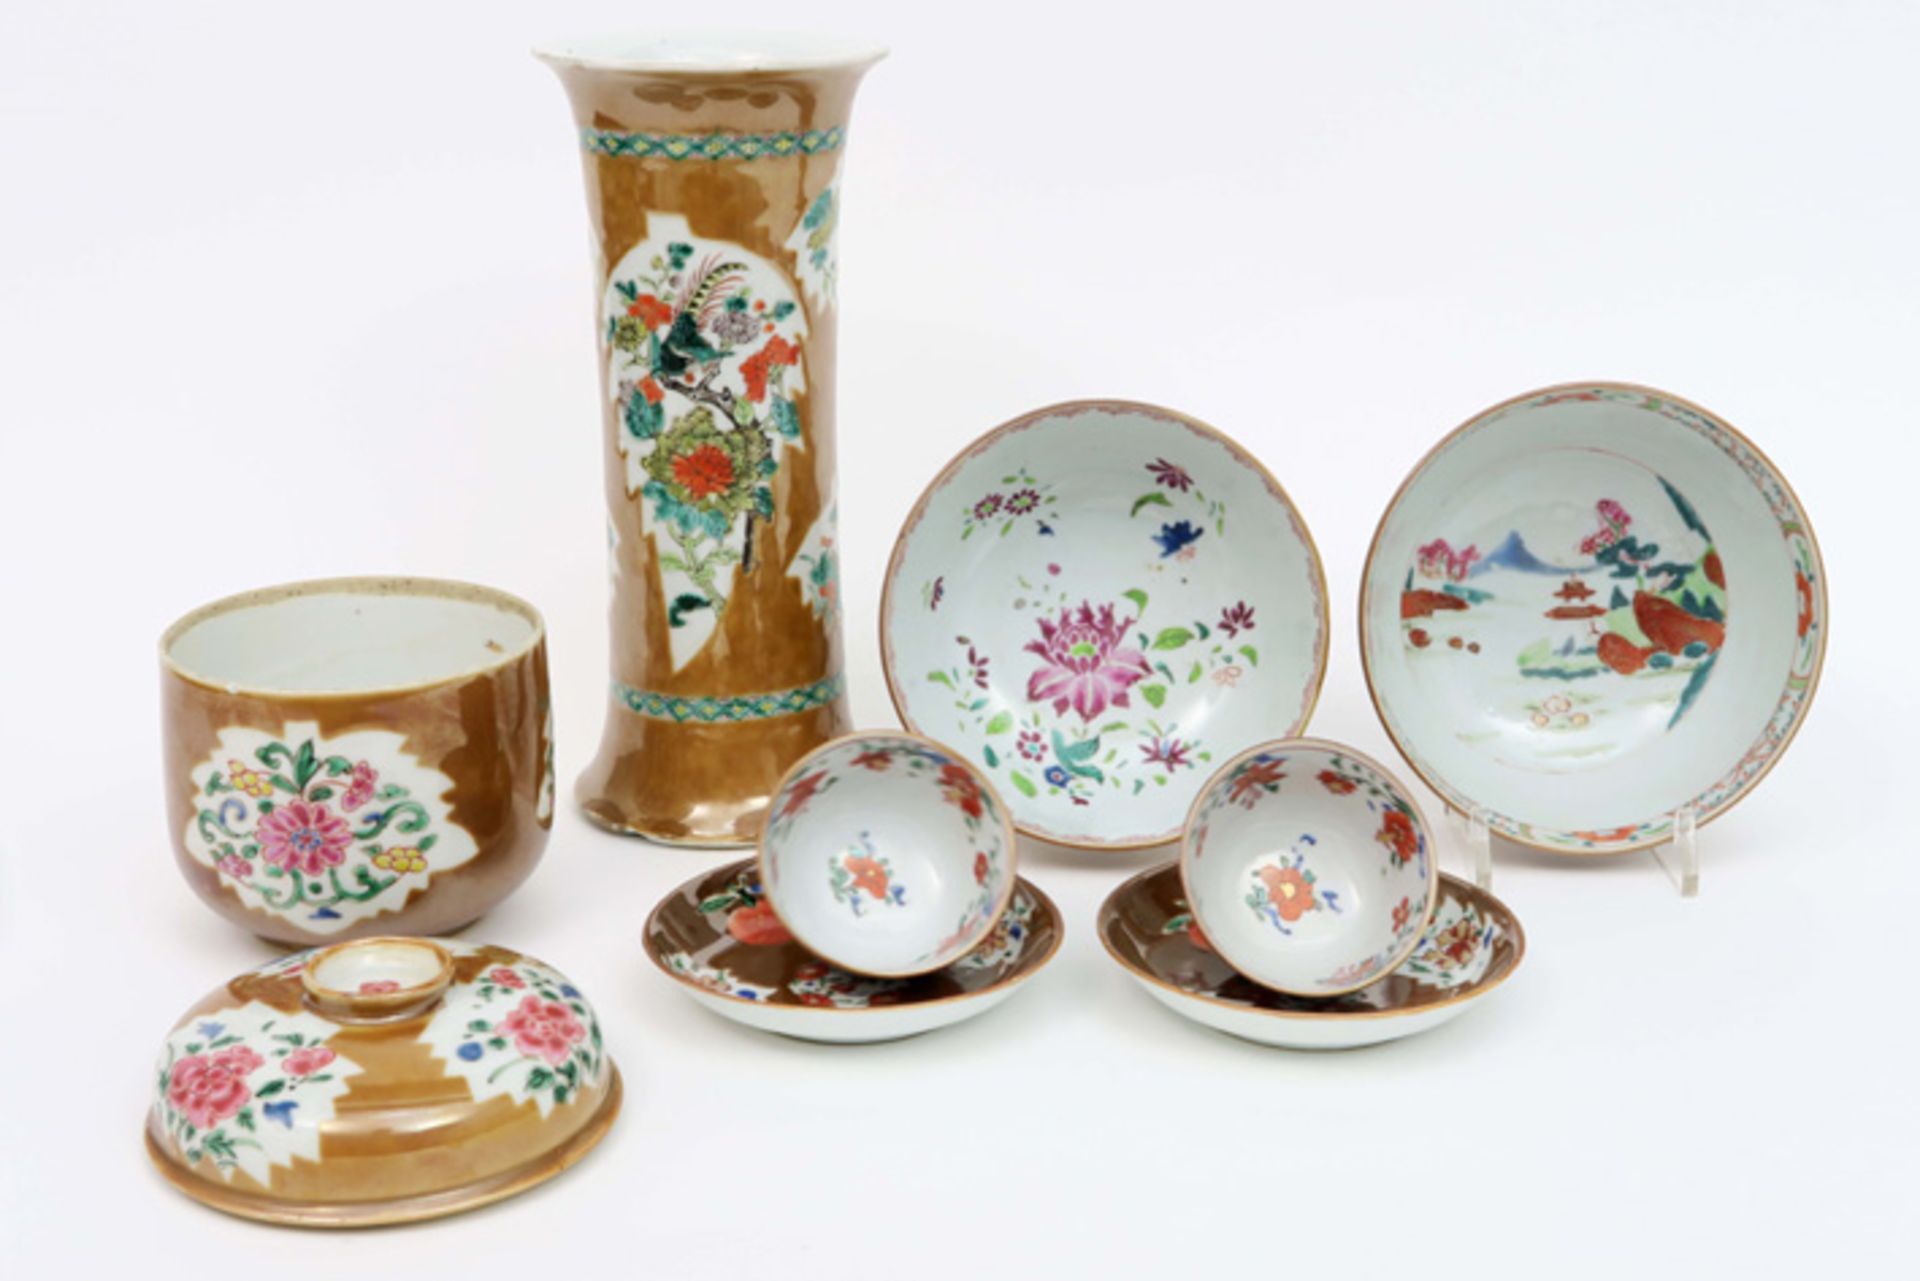 eight 18th Cent. Chinese items in "café au lait" porcelain : lidded pot, two sets of cup and - Image 3 of 4